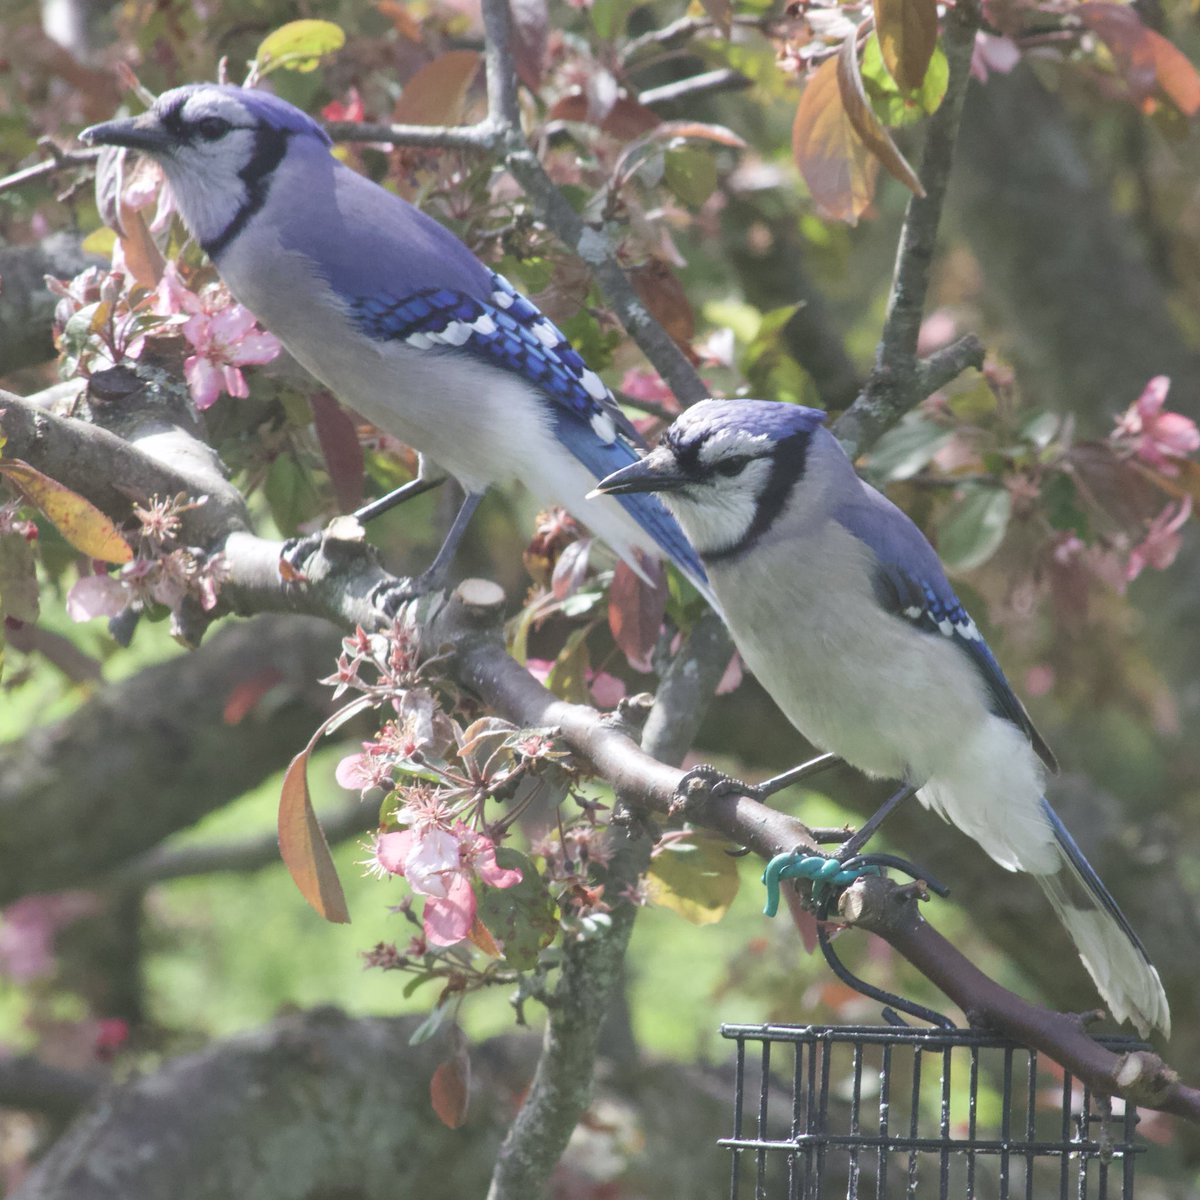 #TwosDay blue jays 💙💙 the bottom one must be a young adult, I watched it get fed twice!